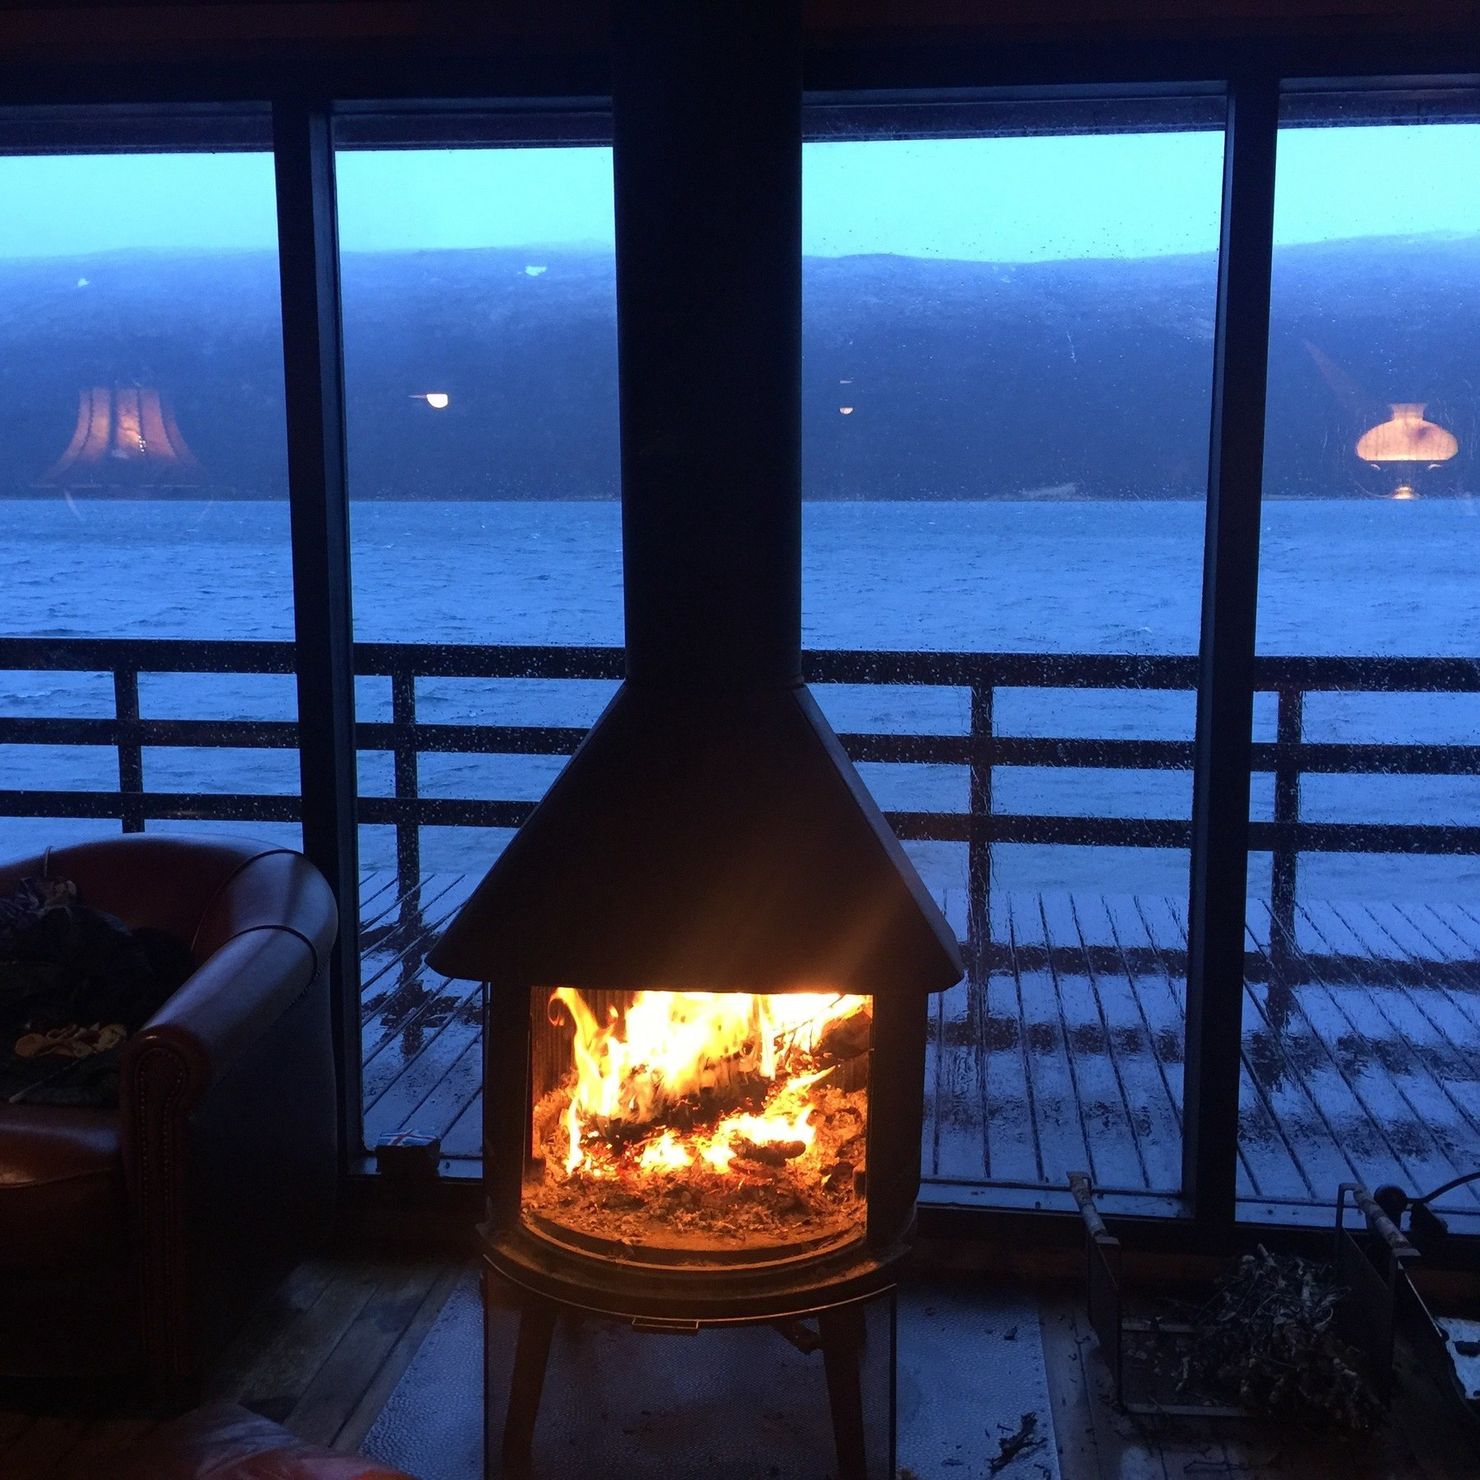 Very cosy: The wood stove and view of lake Skorradalsvatn